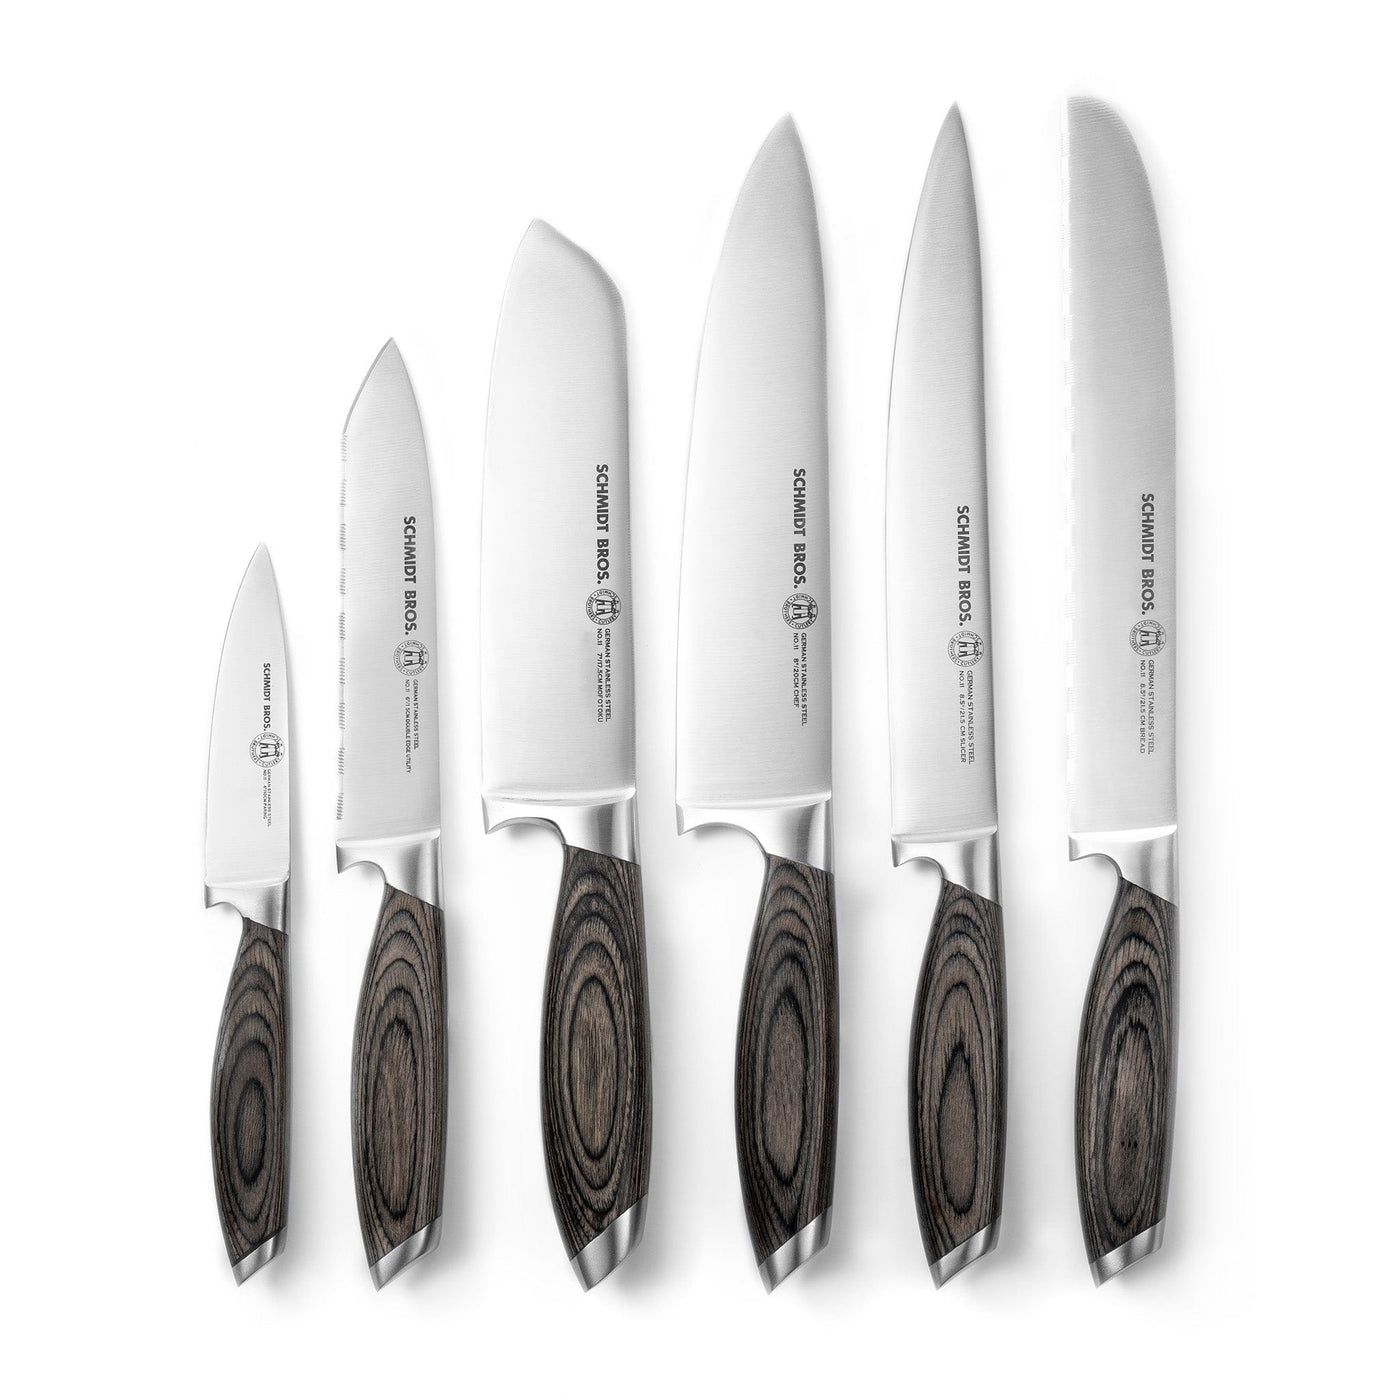 https://schmidtbrothers.com/cdn/shop/files/schmidt-brothers-kitchen-cutlery-schmidt-brothers-bonded-ash-7-piece-knife-set-high-carbon-stainless-steel-cutlery-with-black-ash-wood-and-acrylic-magnetic-knife-block-30758452953149_1400x.jpg?v=1684518761